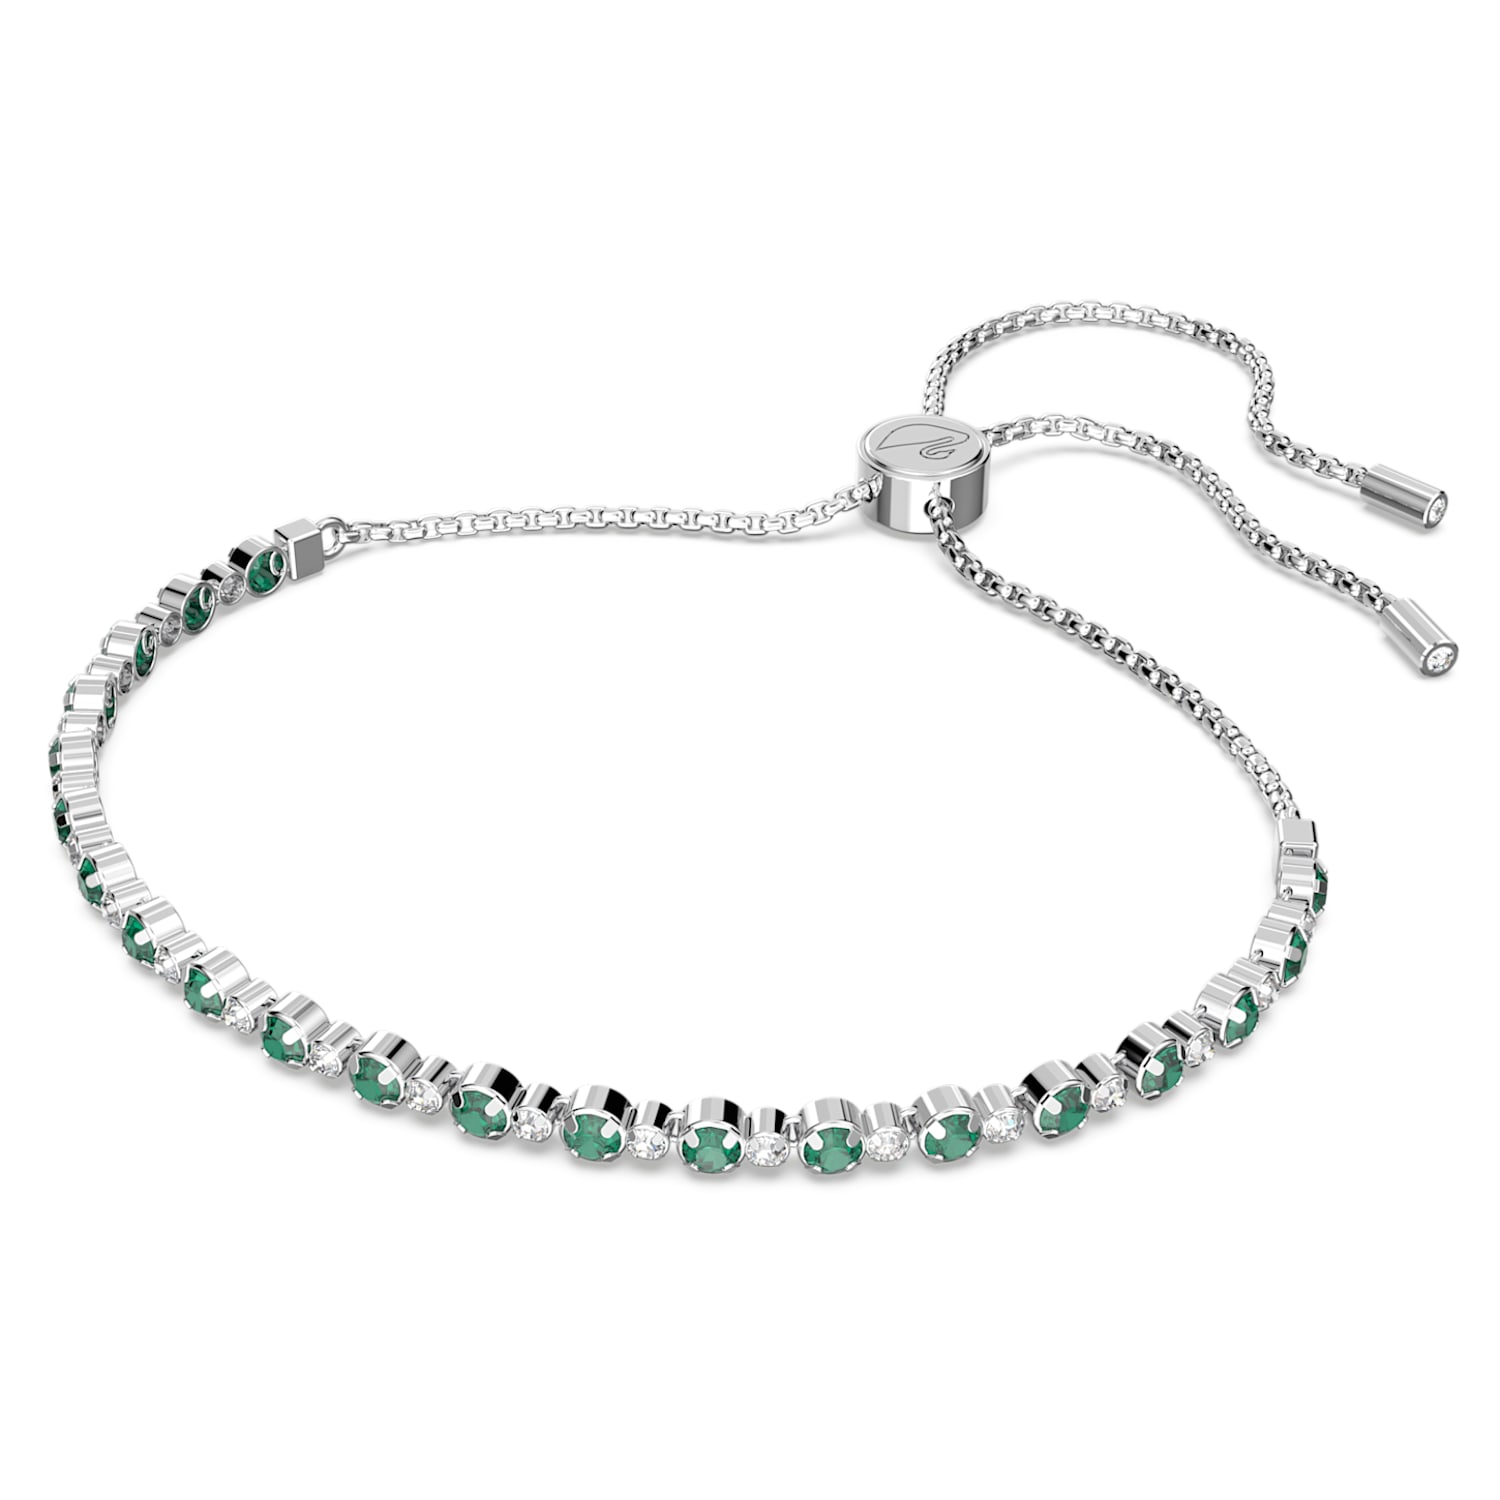 Buy Swarovski Crystal Limited Edition Charity Beaded Bracelet in Online in  India  Etsy